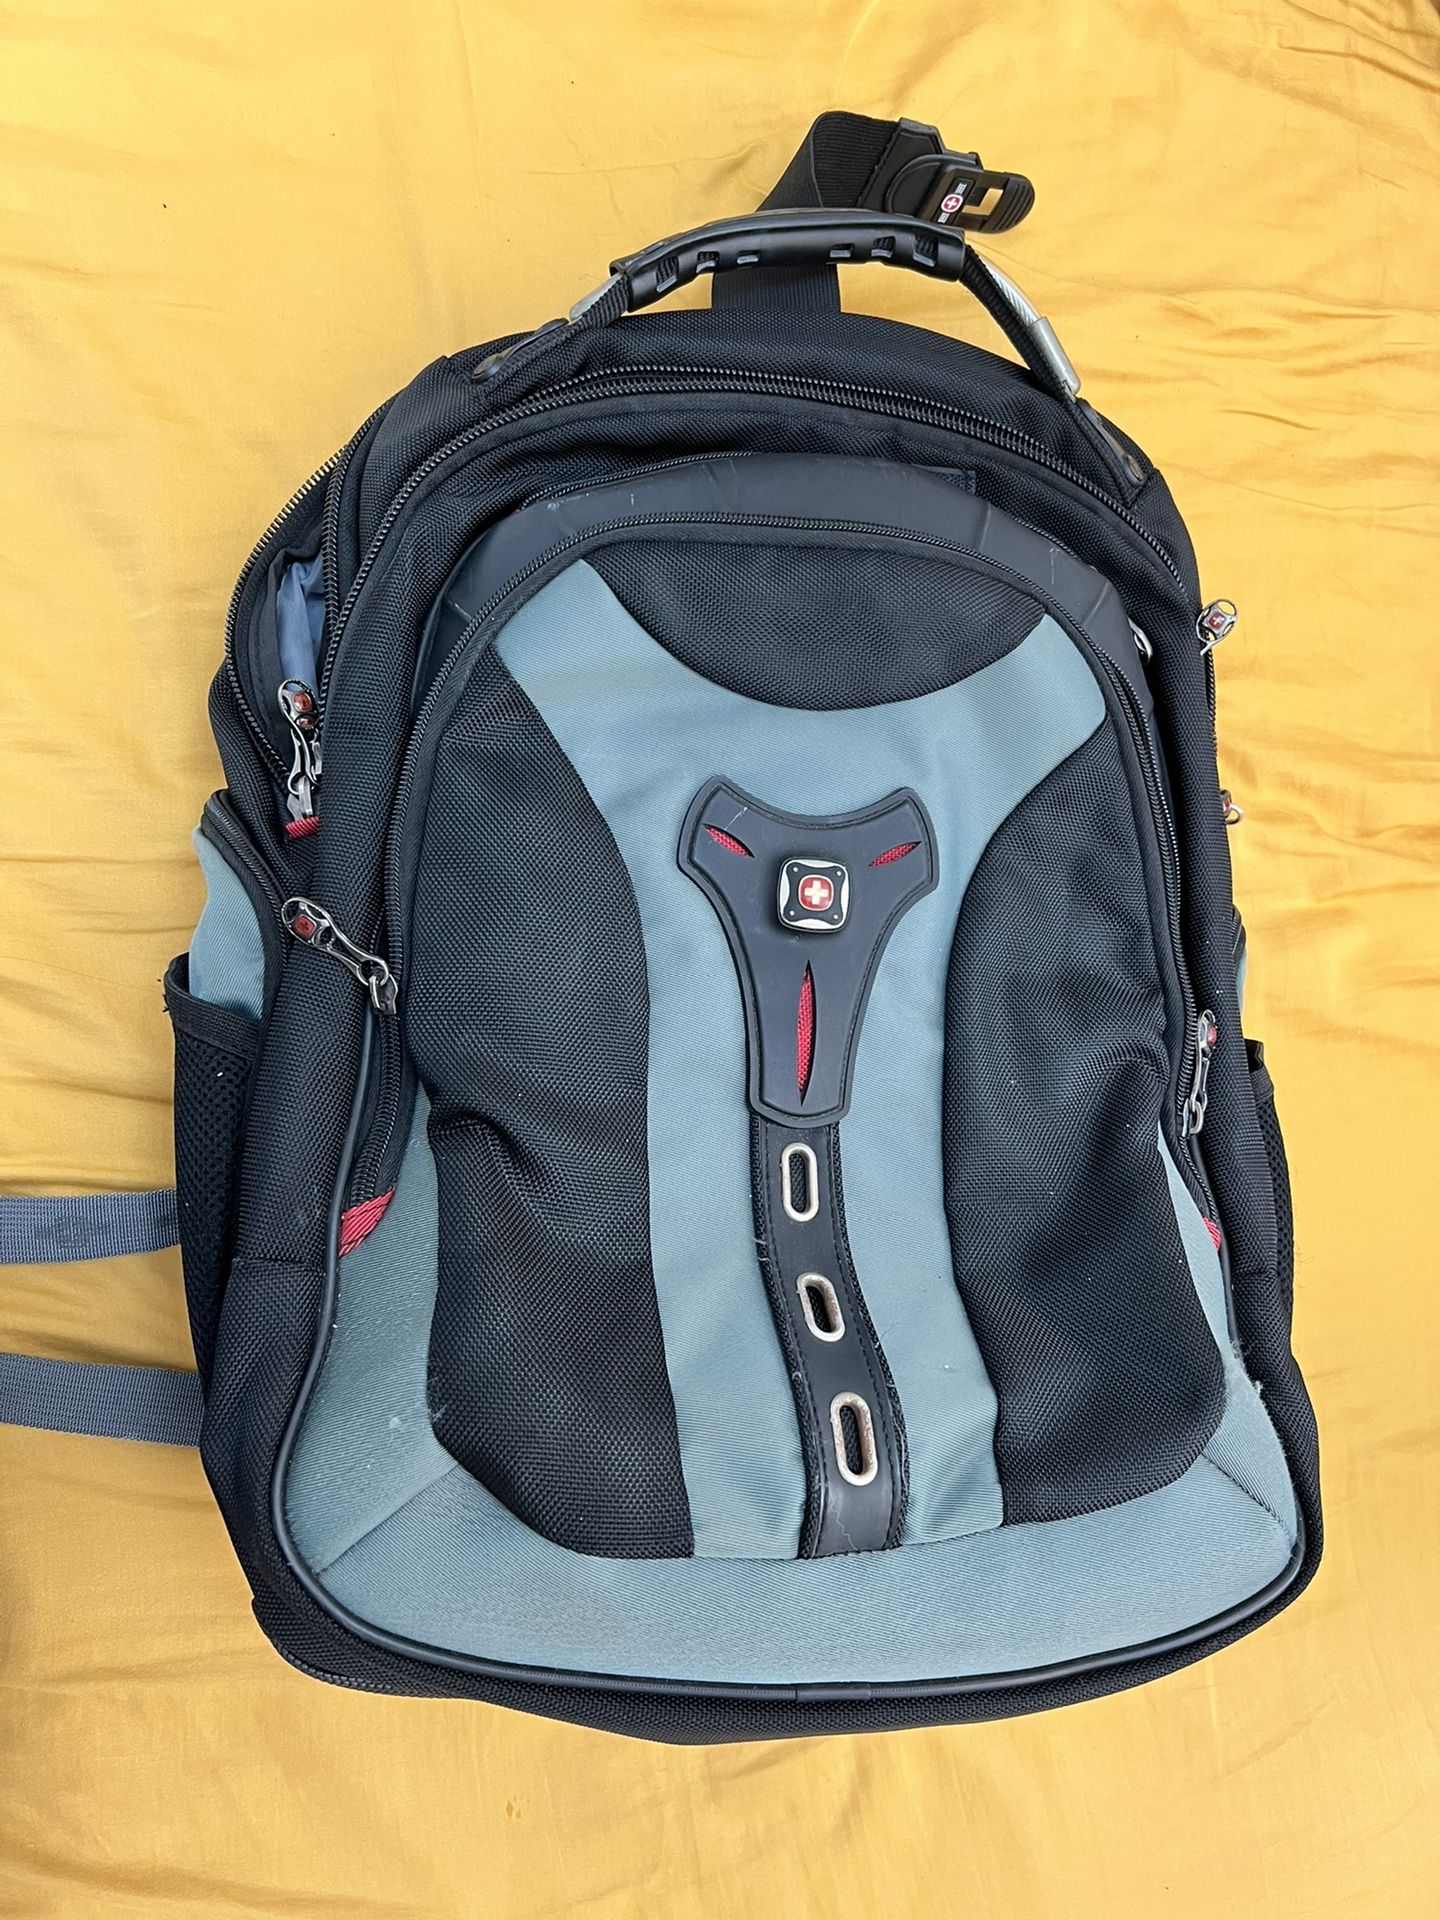 Swissgear Brand By Wenger. Laptop 22” Multiple Pockets Backpack. With Back Cushions And Shock Absorbing 